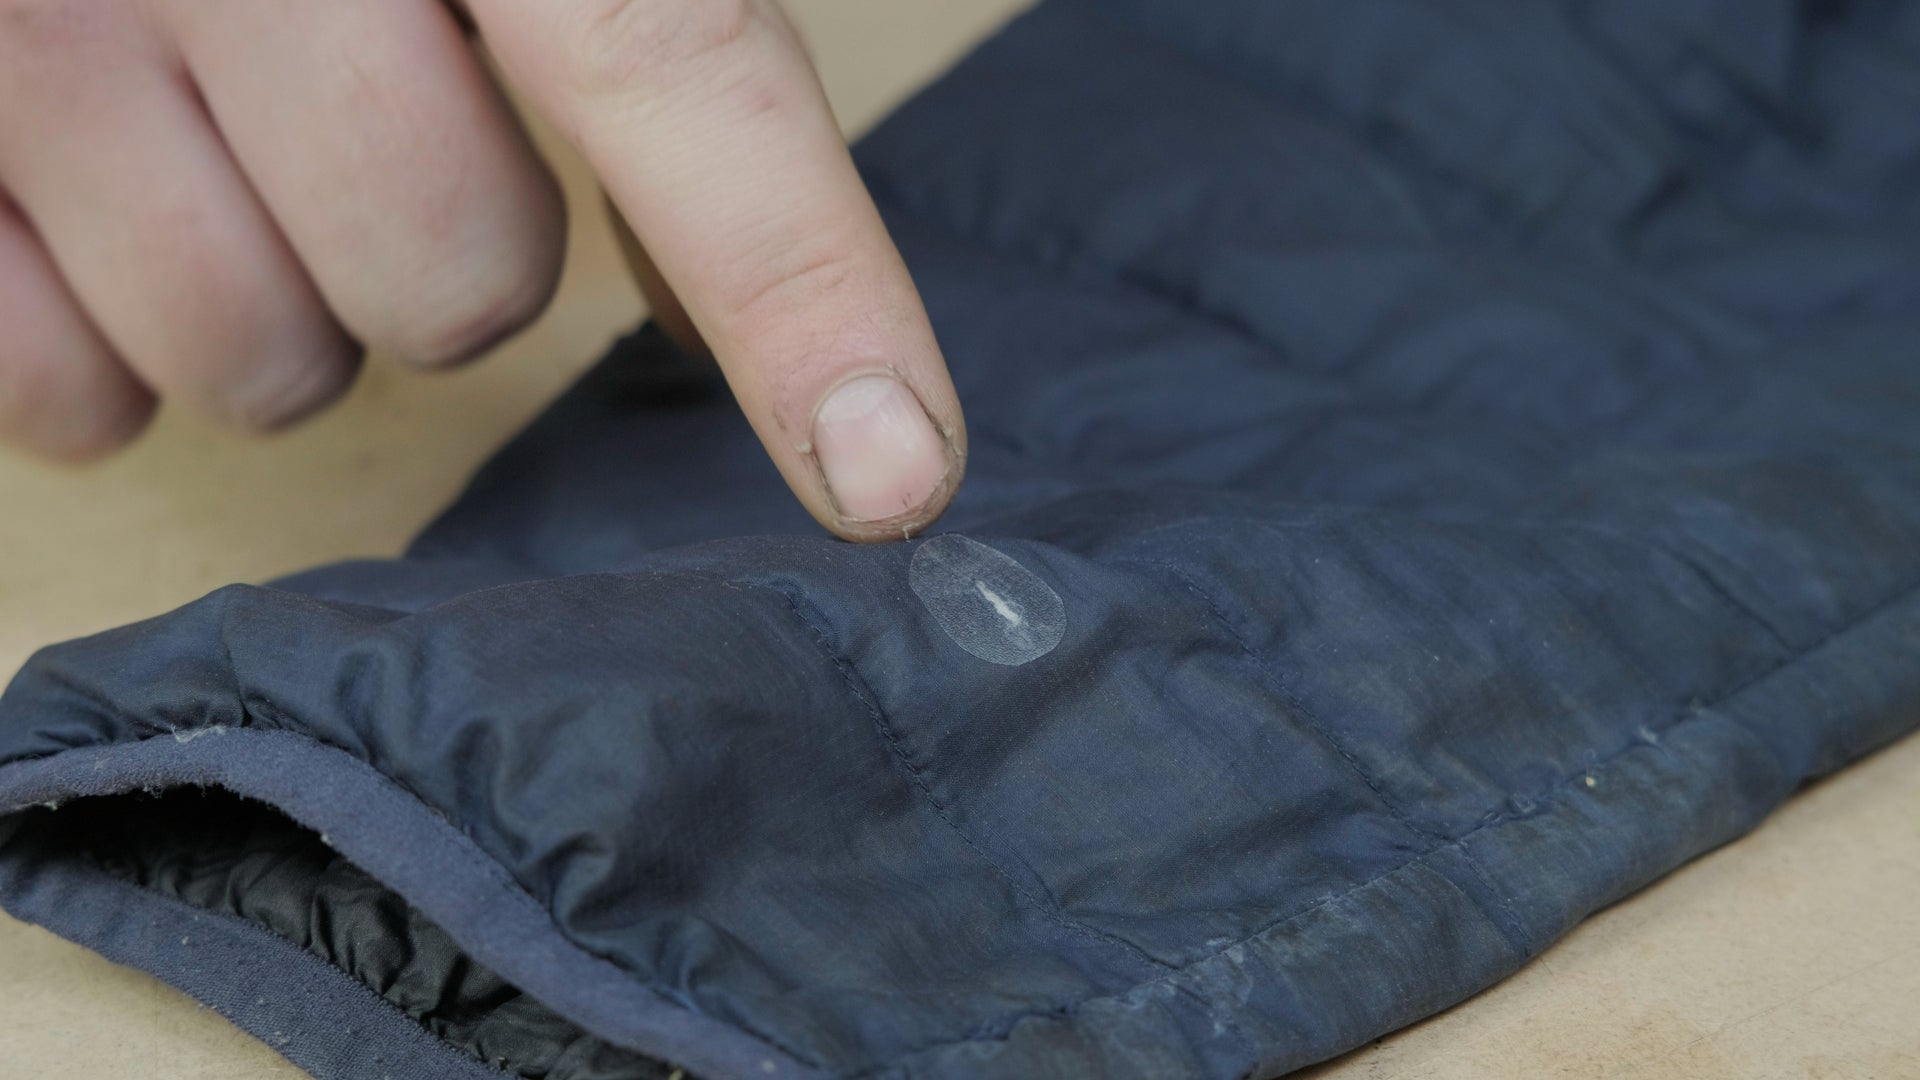 Repair a HOLE in your Insulated Jacket with Tenacious Tape ! 